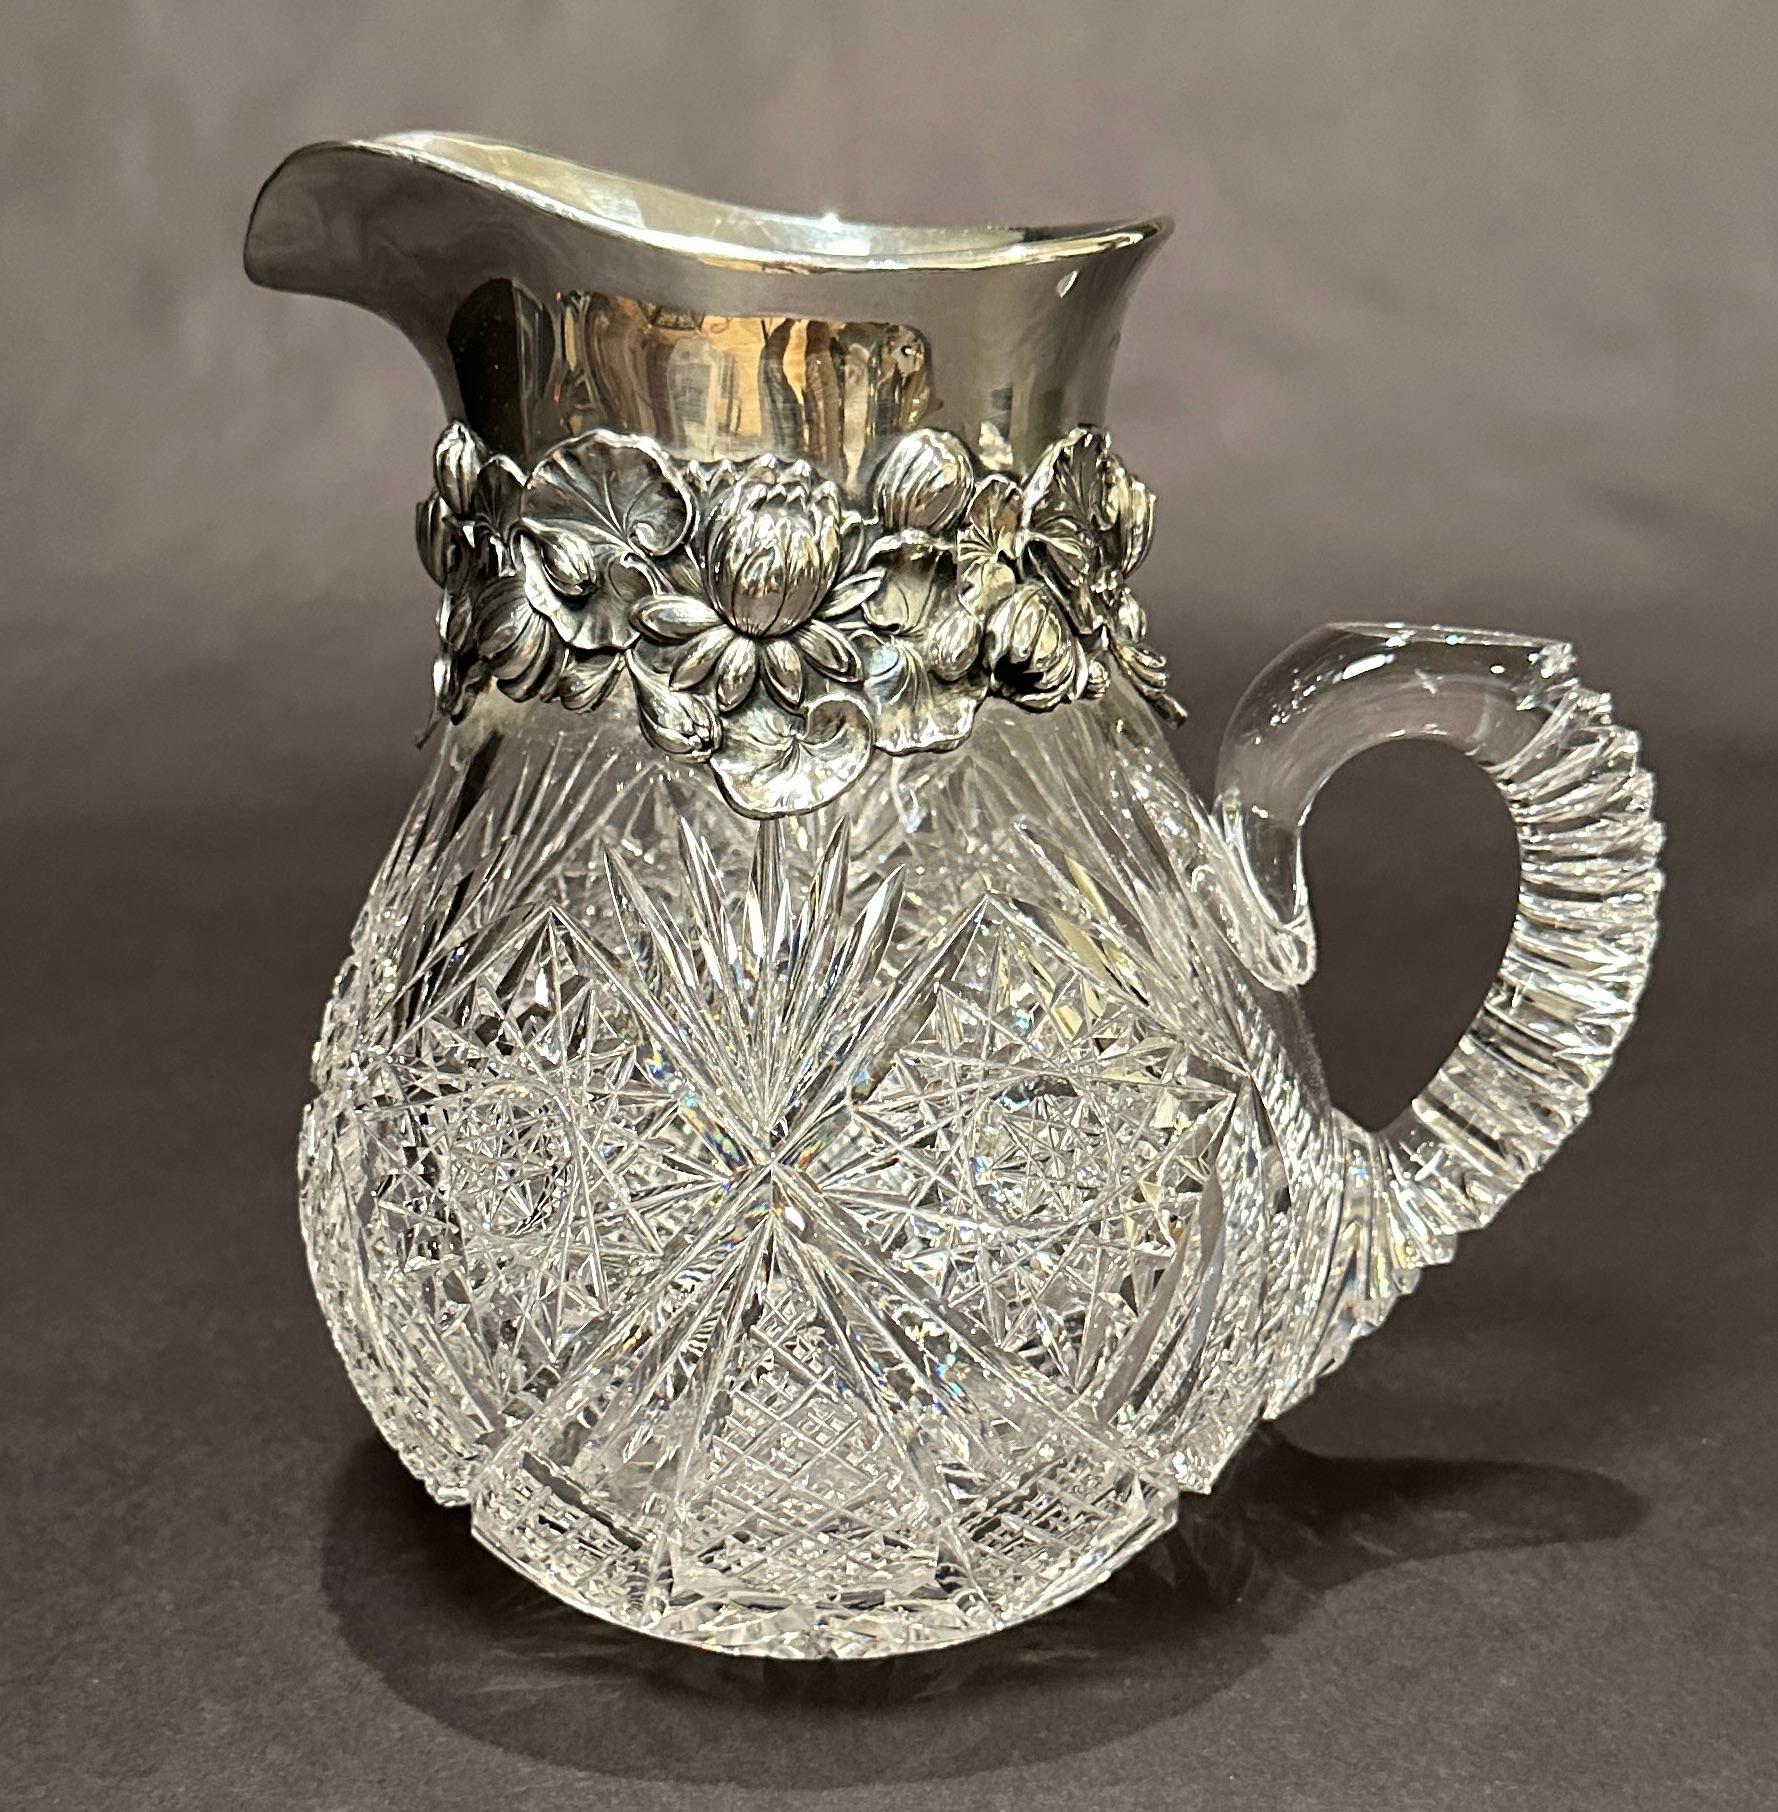 American Brilliant Cut Glass Pitcher, late 19th c., possibly C. Dorflinger and Sons, hobstar, diamond and fan pattern with Gorham sterling silver mounts in water lily motif. Period monogram under lip. Fully hallmarked.